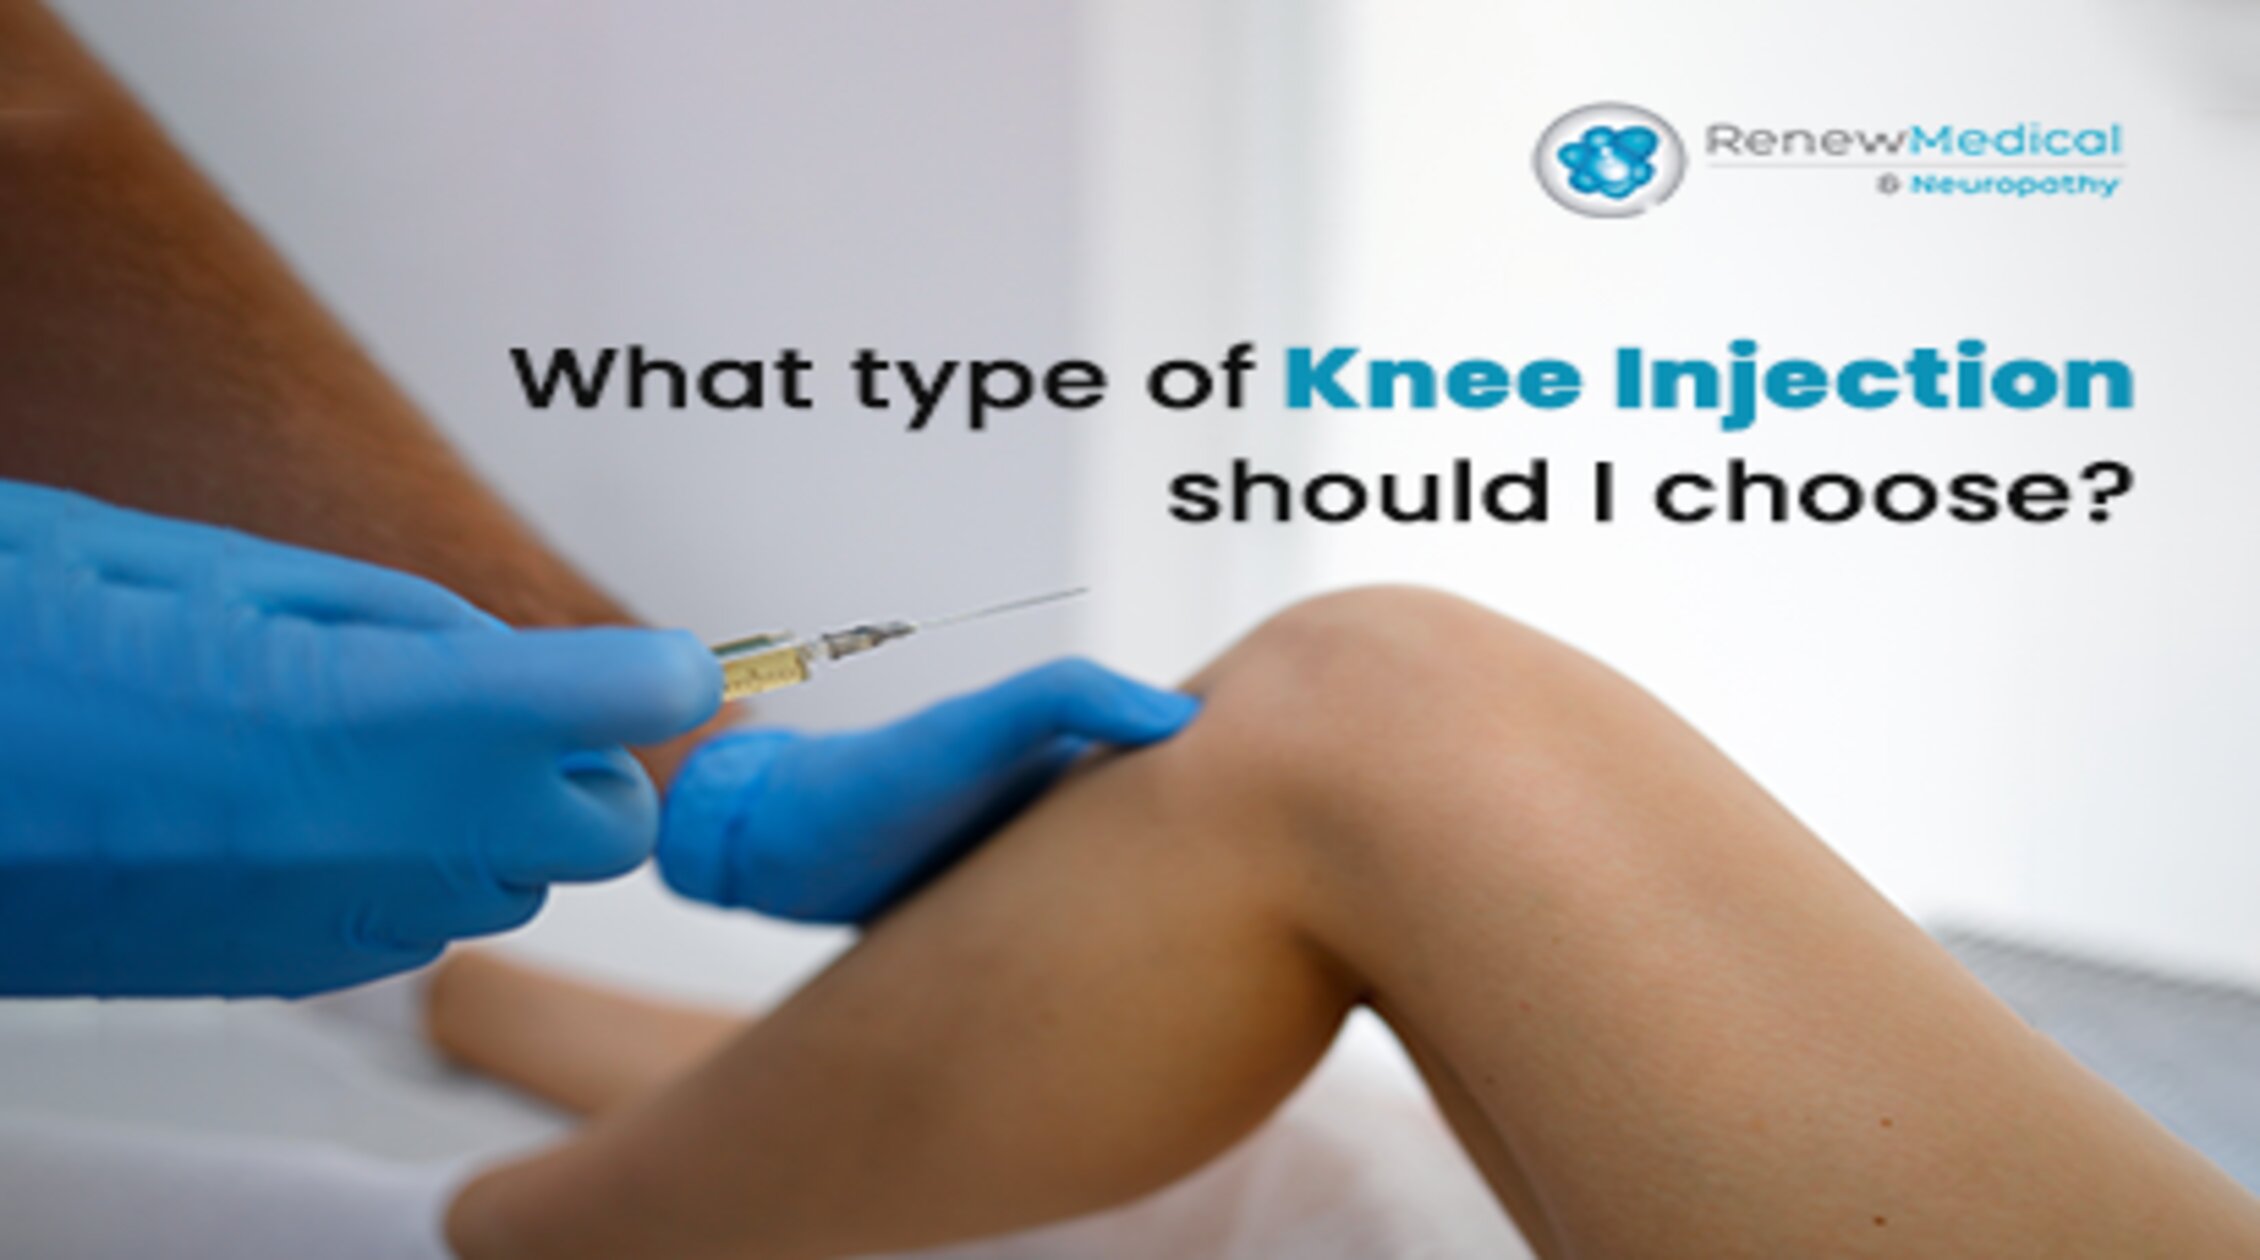 What type of Knee Injection should I choose?